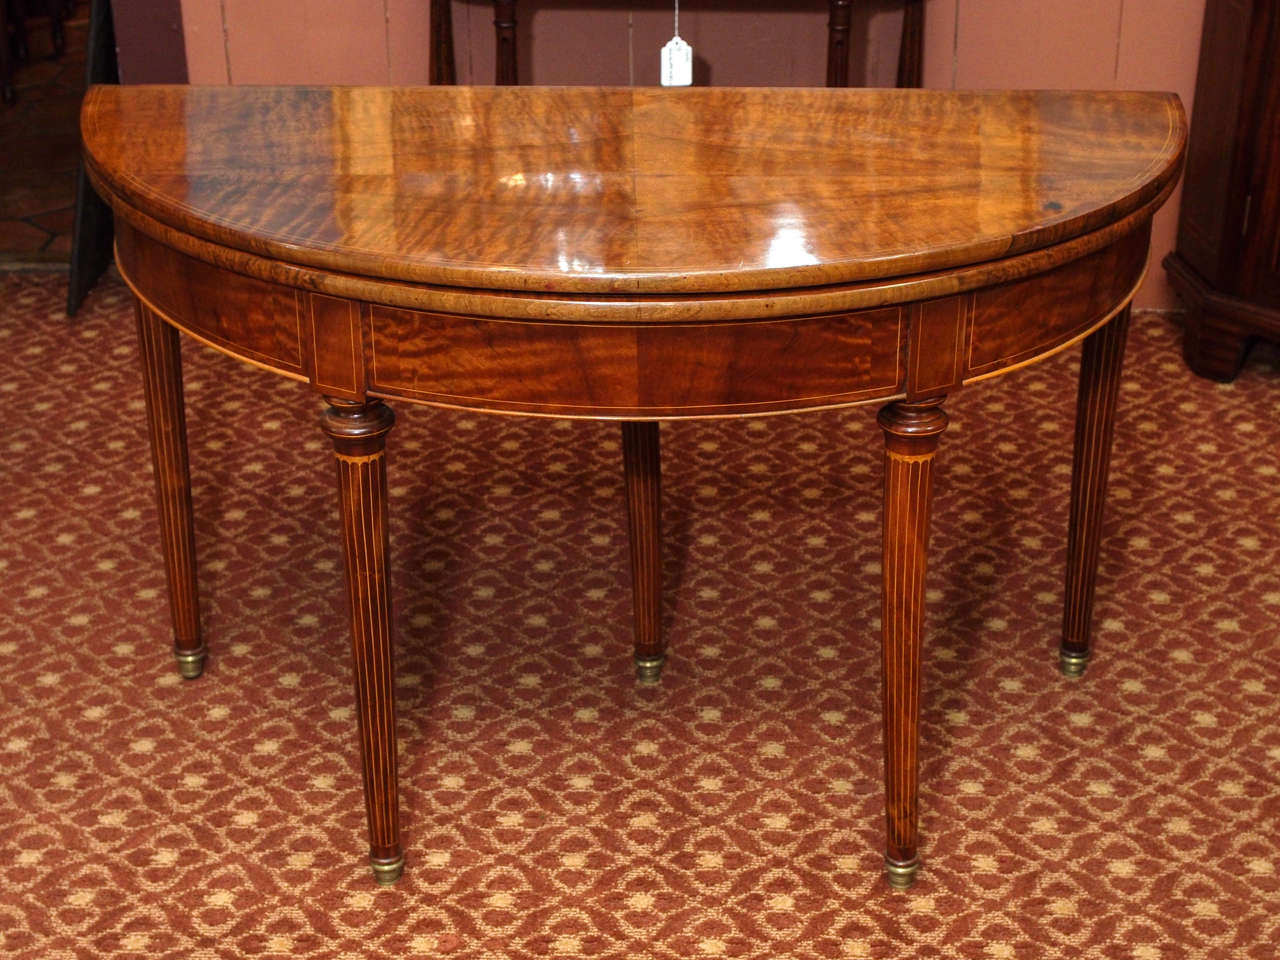 Exceptional French Louis XVI/Charles X transition faded mahogany demi-lune table with lemon wood inlay